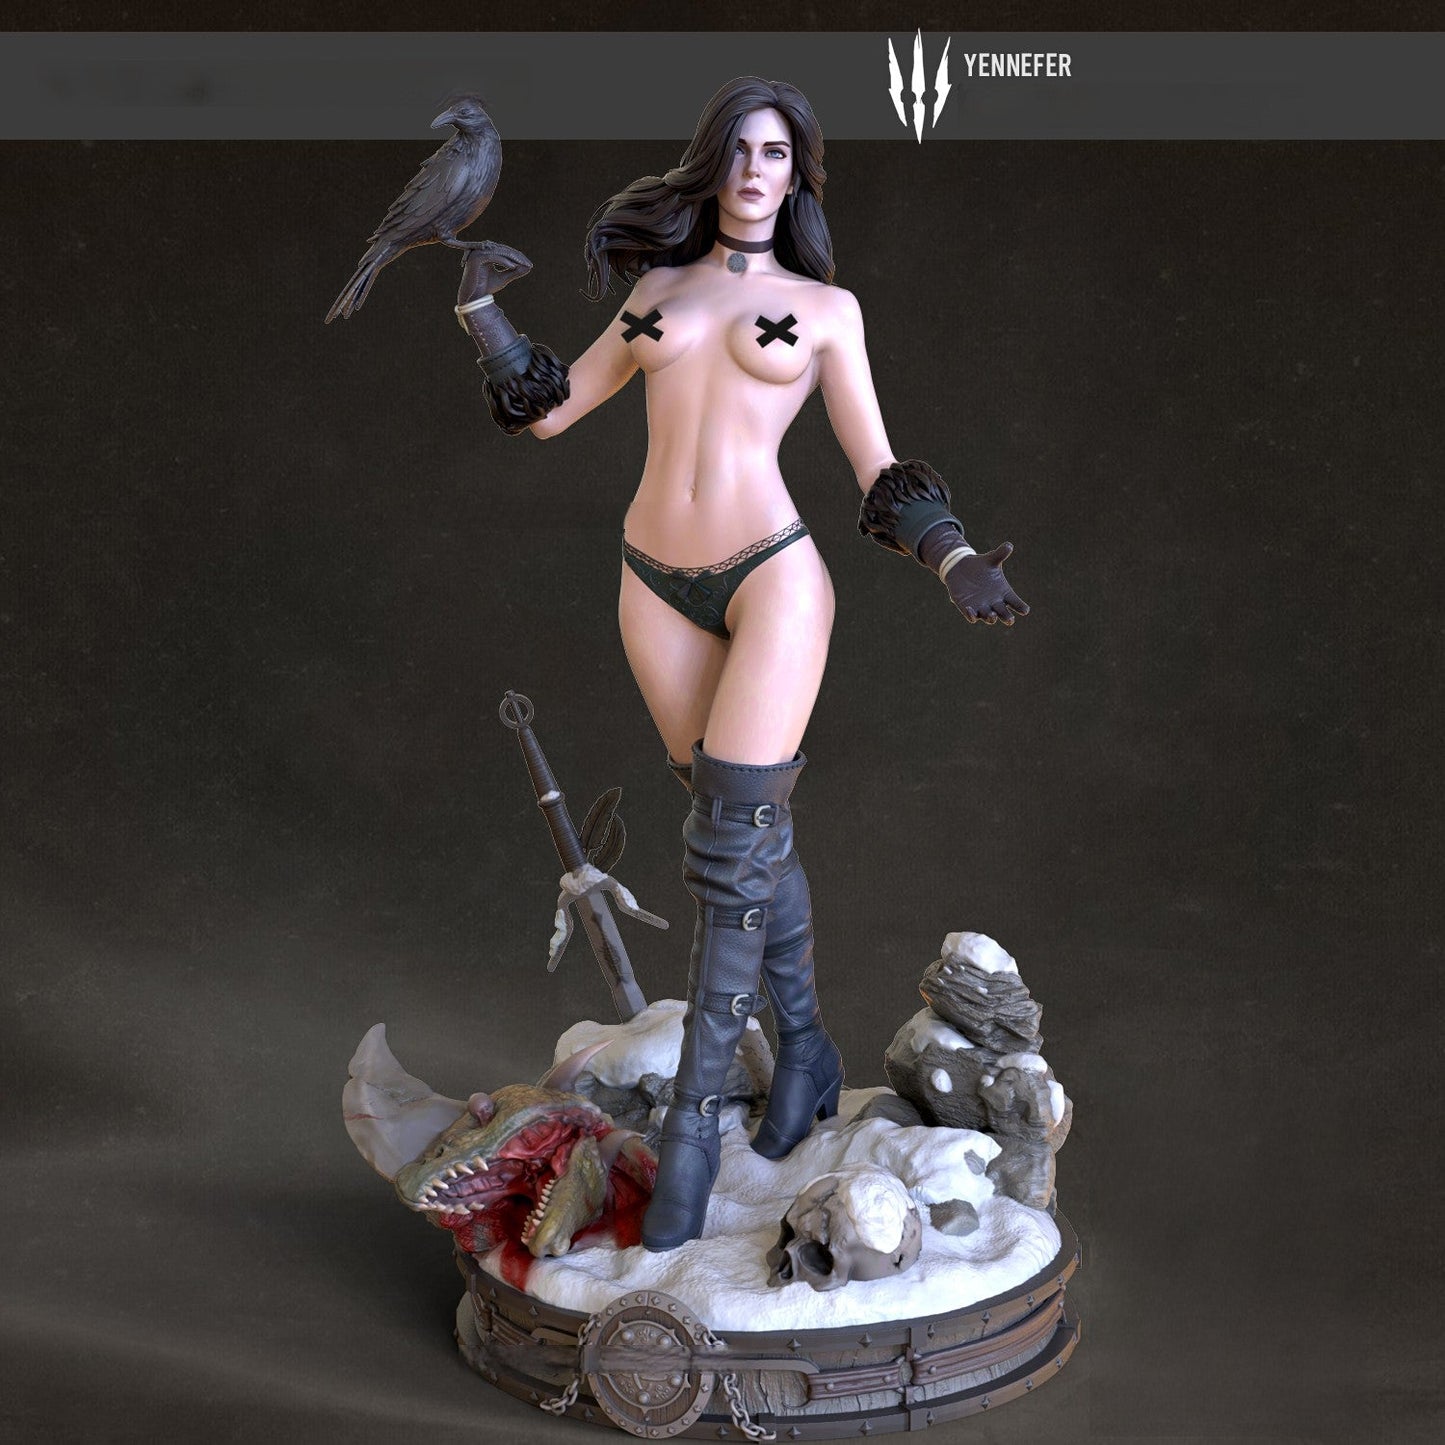 1613 Yennefer NSFW - The Witcher - STL 3D Print Files